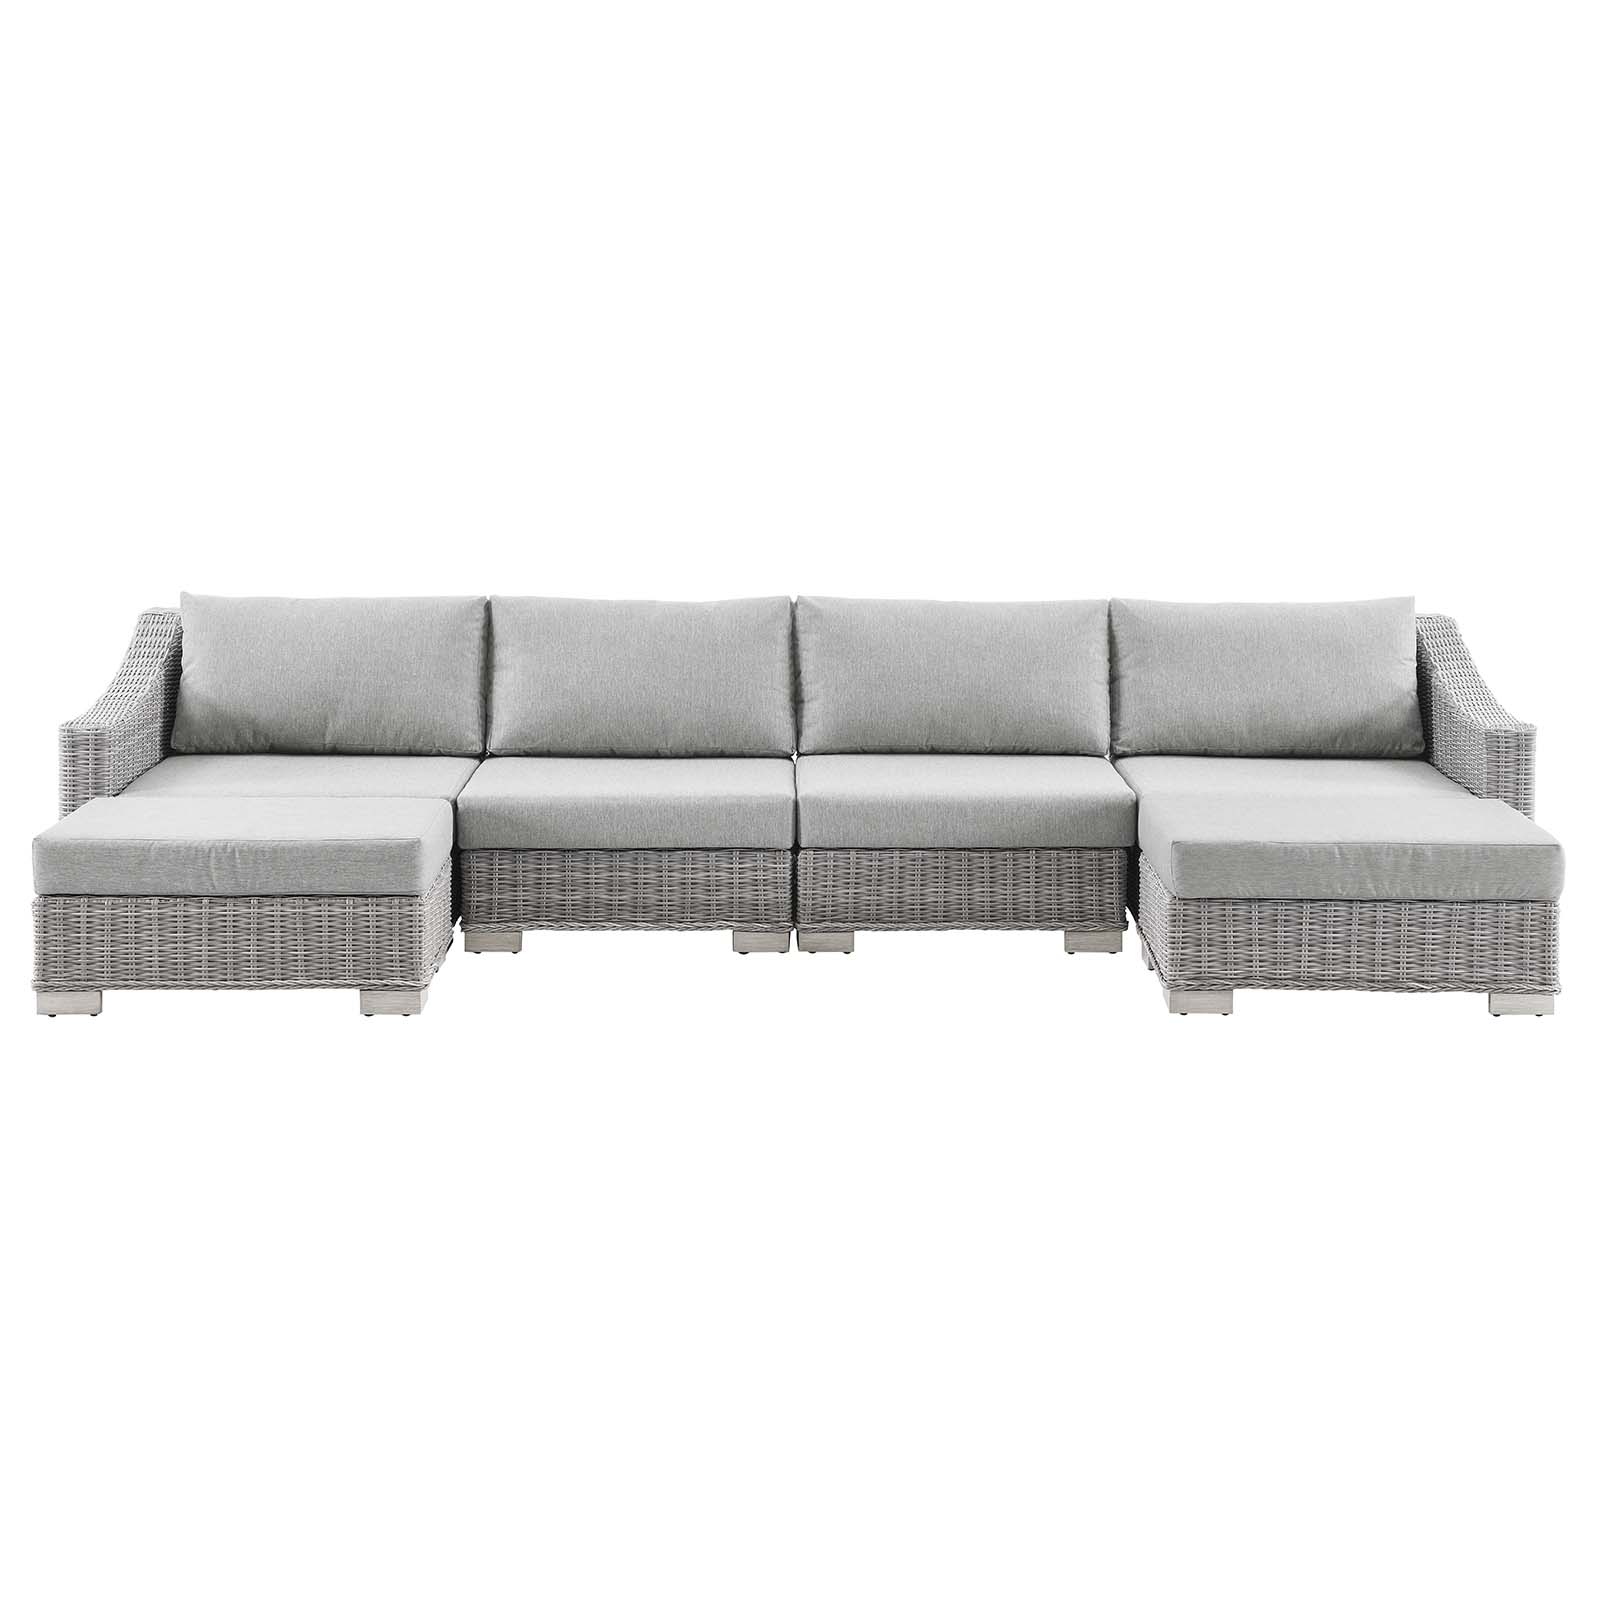 Lounge Sectional Sofa Chair Set, Rattan, Wicker, Grey Gray, Modern Contemporary Urban Design, Outdoor Patio Balcony Cafe Bistro Garden Furniture Hotel Hospitality - image 1 of 10